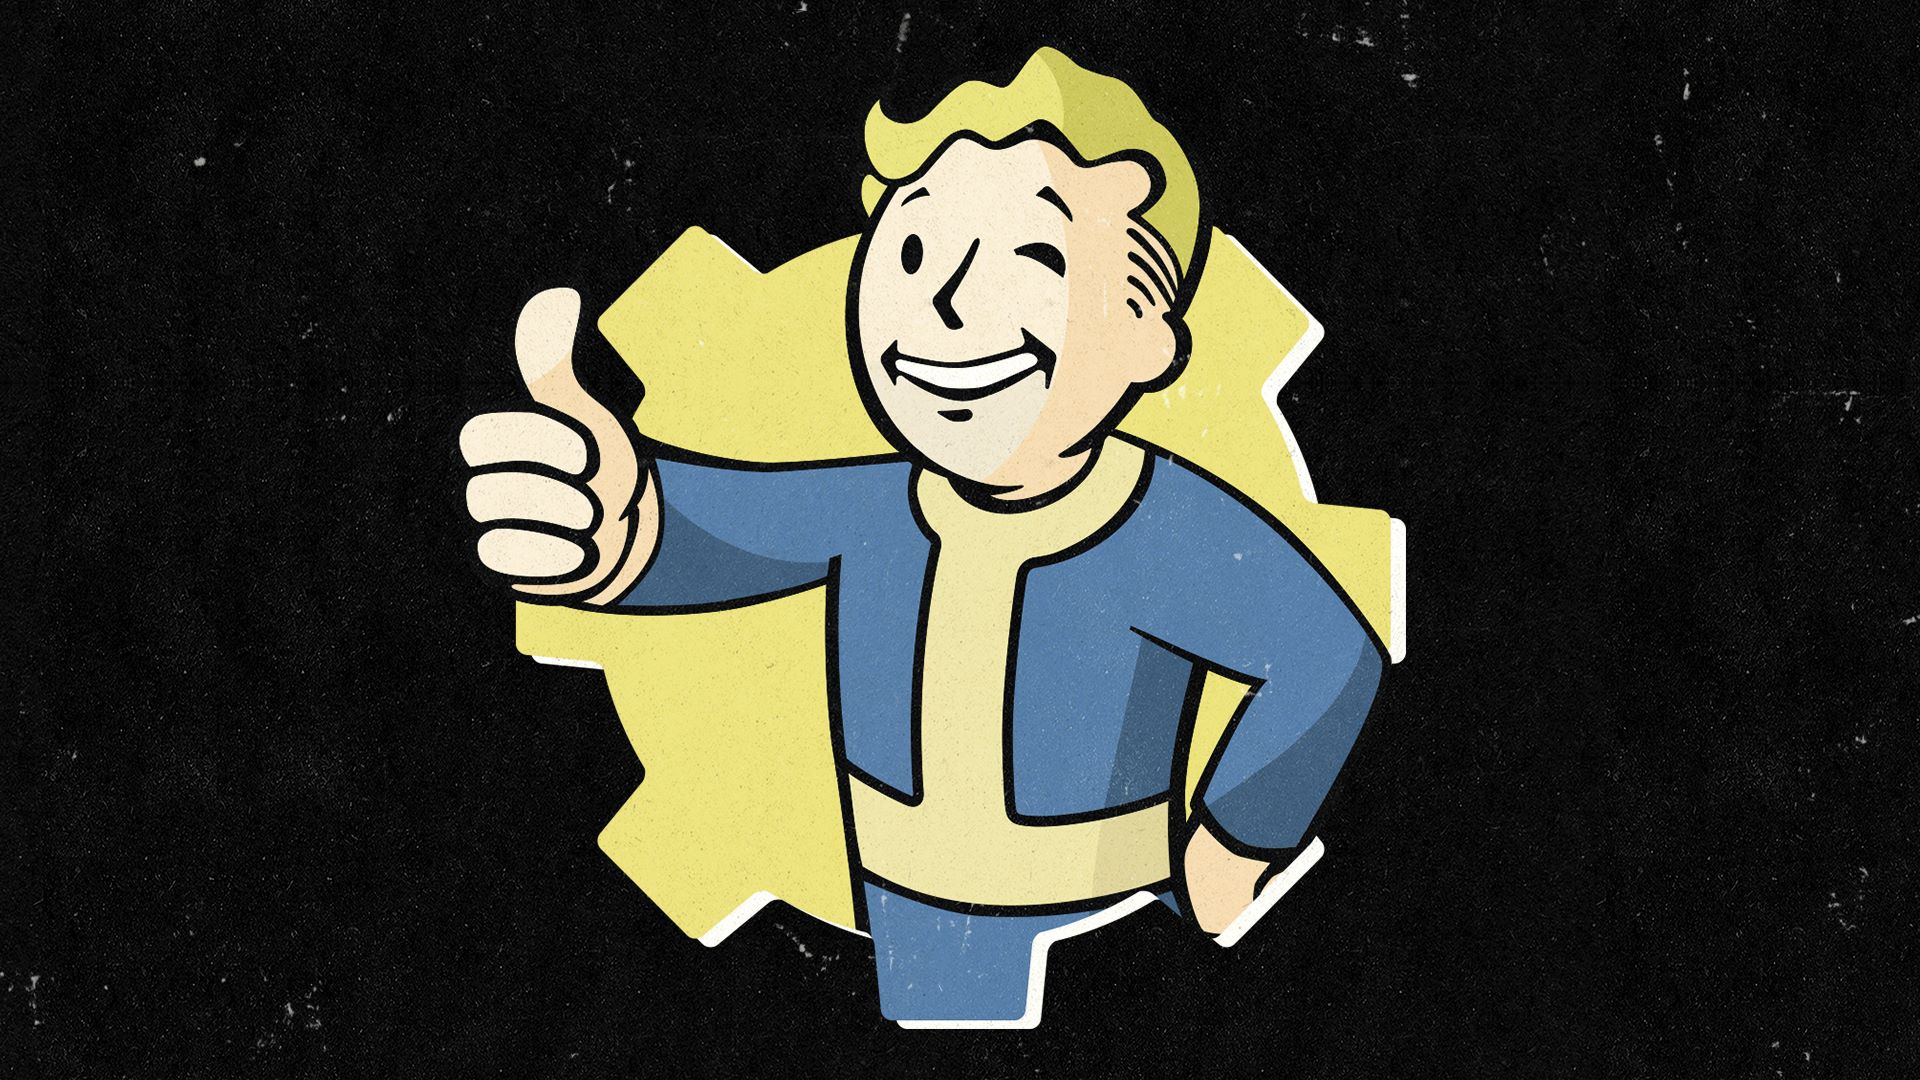 Buy Fallout 4: Game of the Year Edition - Microsoft Store en-CA